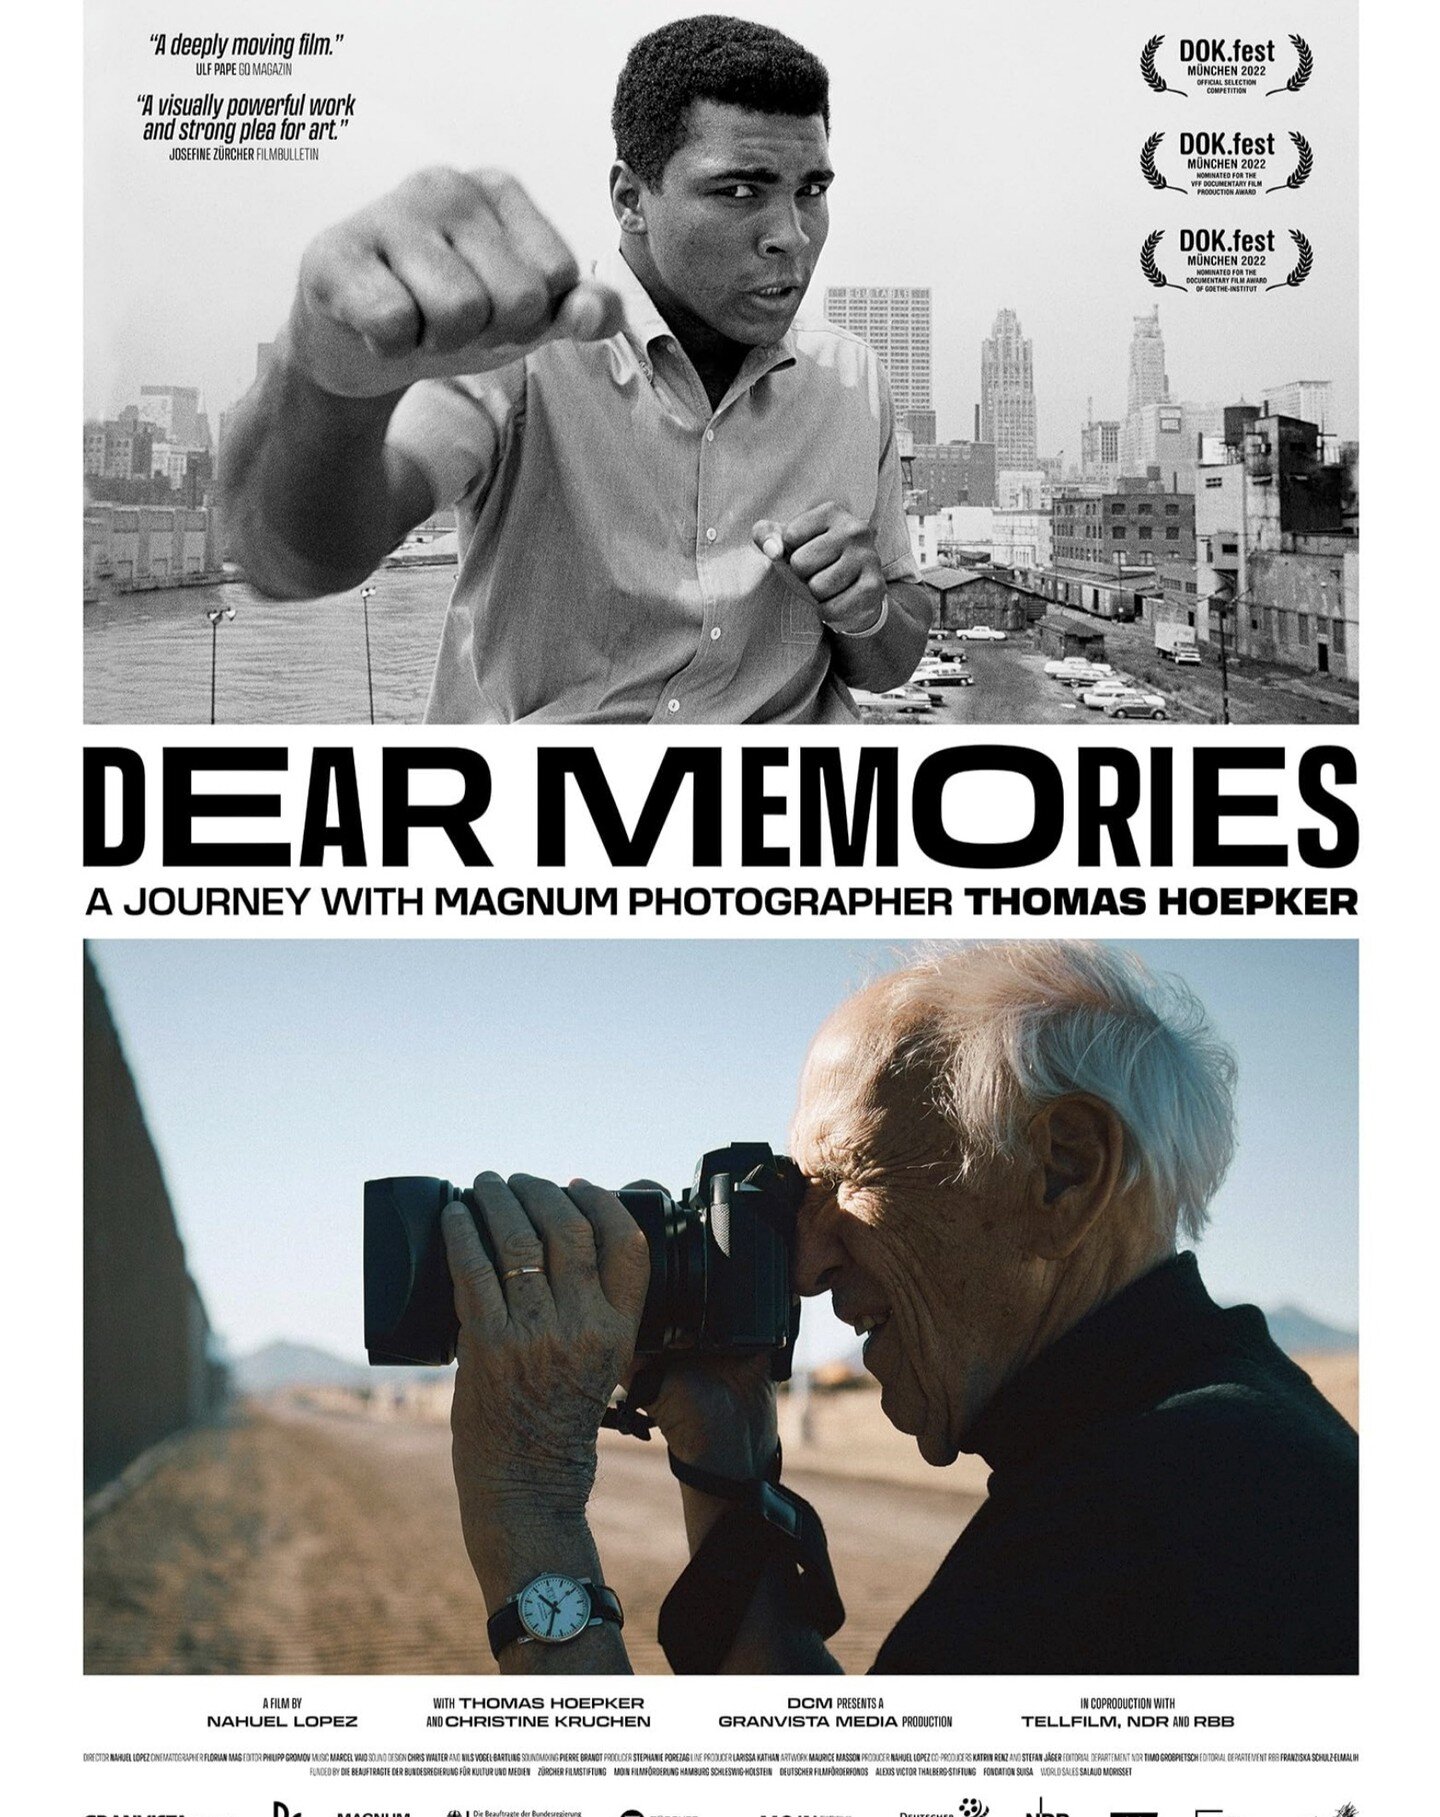 Please join me and @larrycv this Saturday Nov. 4th at @13forest for a discussion and reception following the screening of &ldquo;Dear Memories&rdquo; at the Arlington International Film Festival. Film at 2:45pm; discussion at 4:30pm. @thomashoepker @